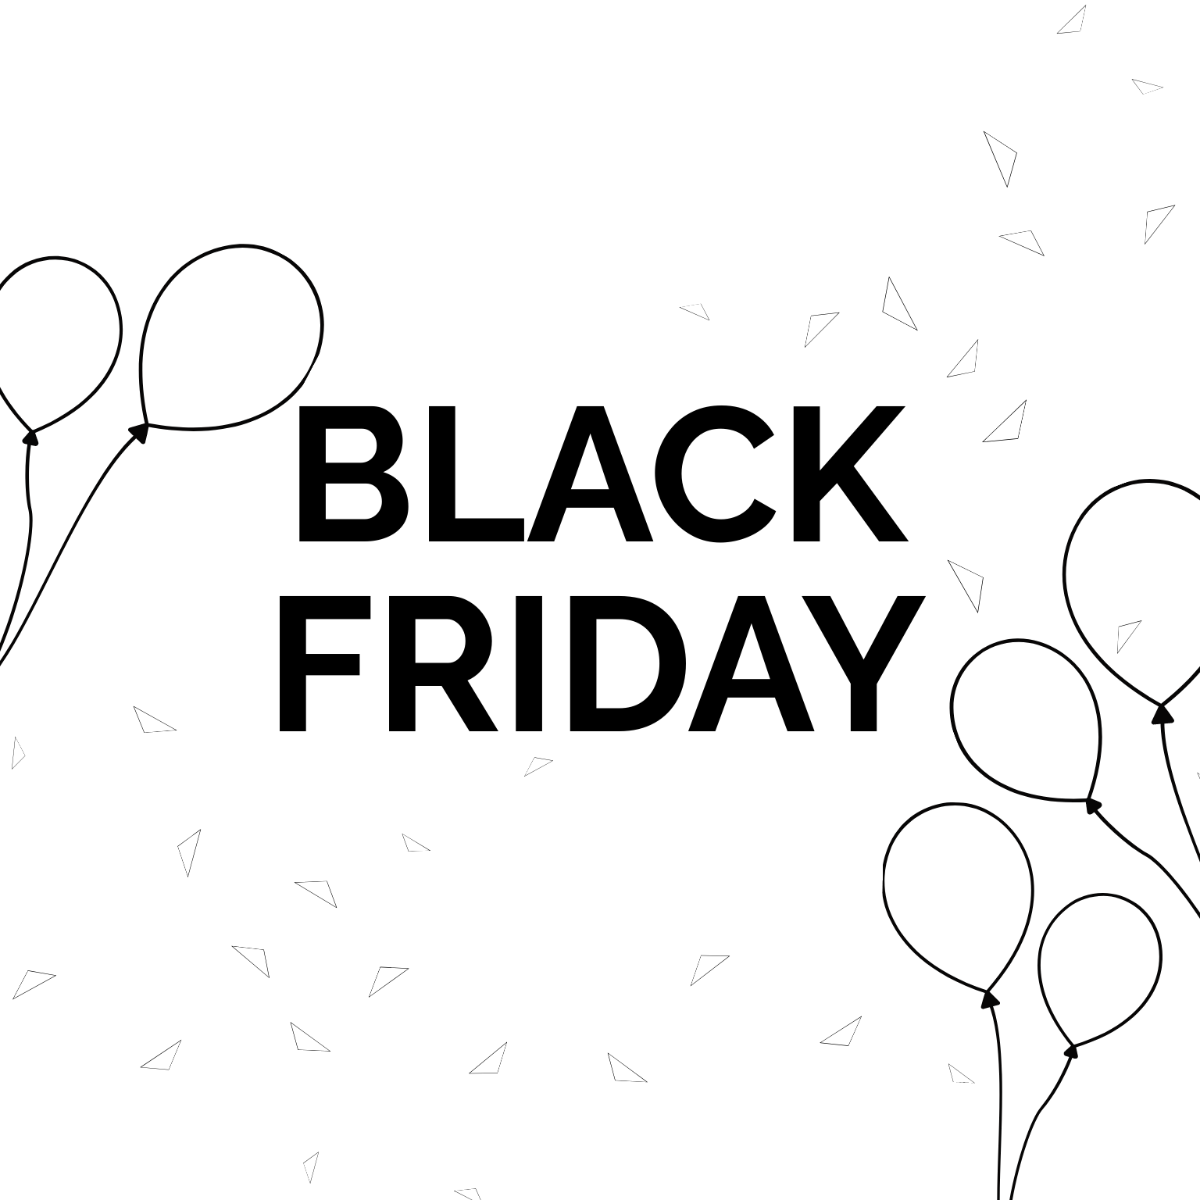 Black Friday Image Drawing Template